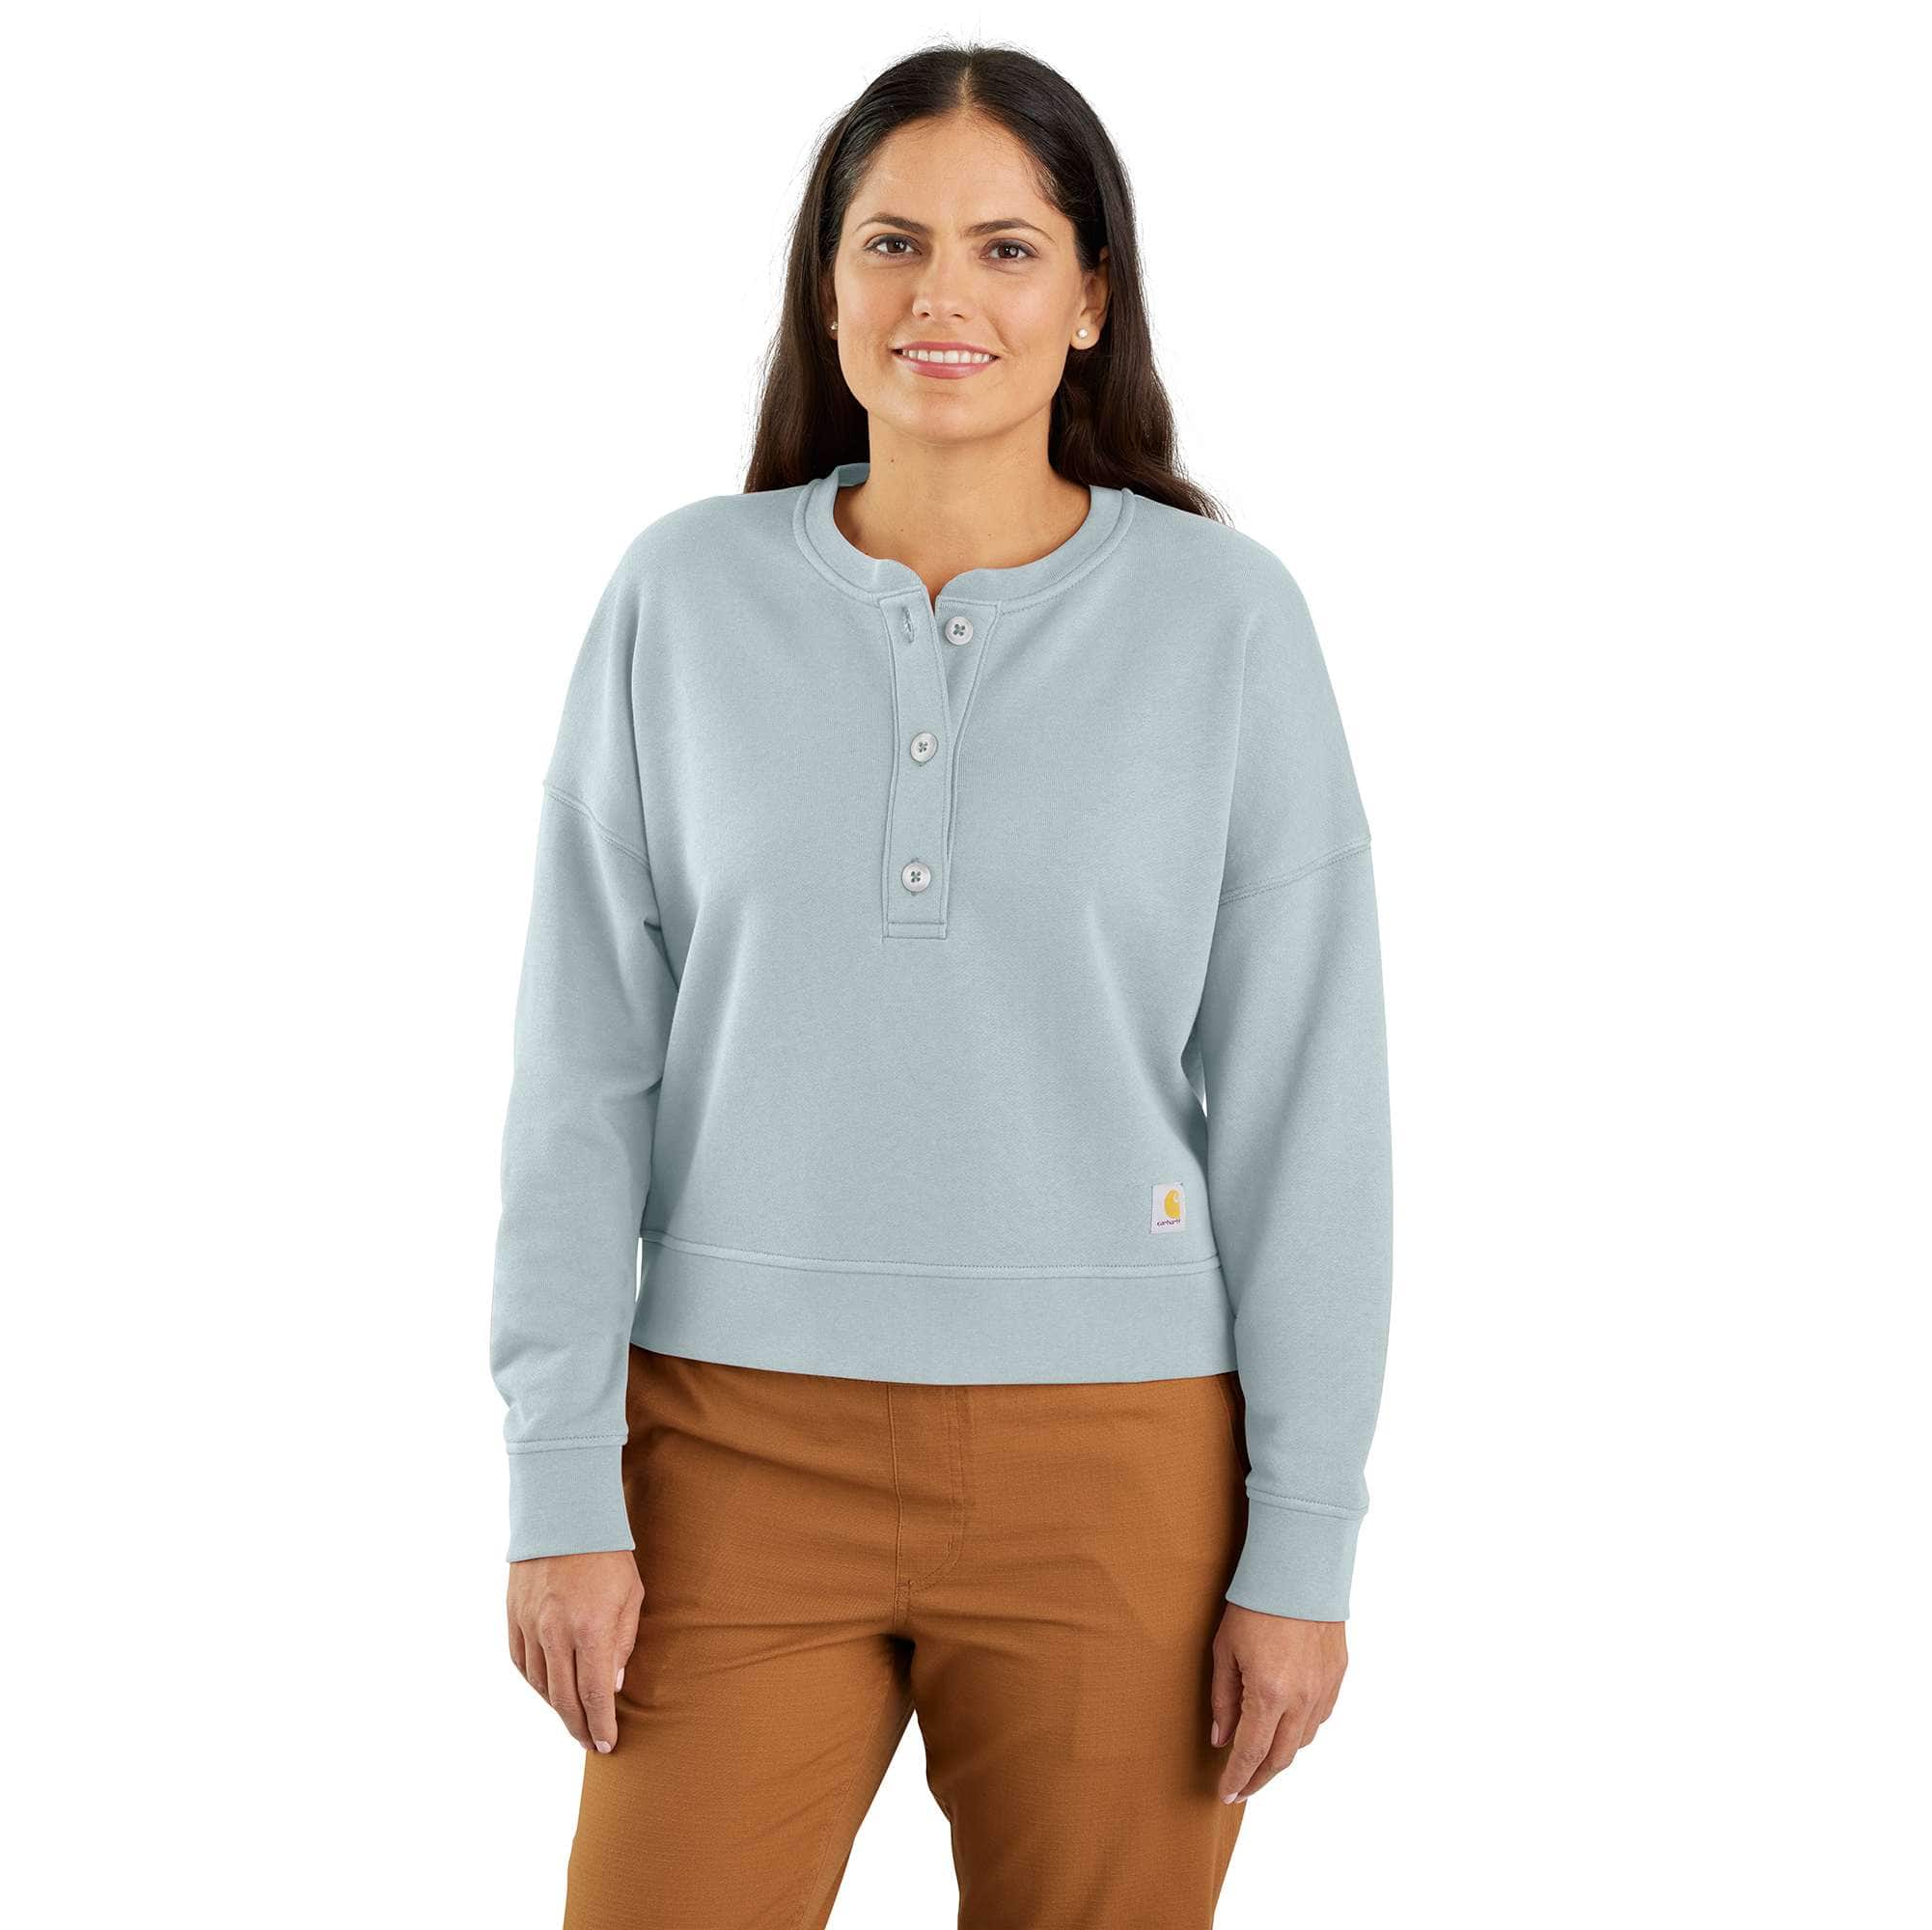 The Prospector - 🌼LADIES THEY'RE HERE!!🌼 Carhartt's new Women's